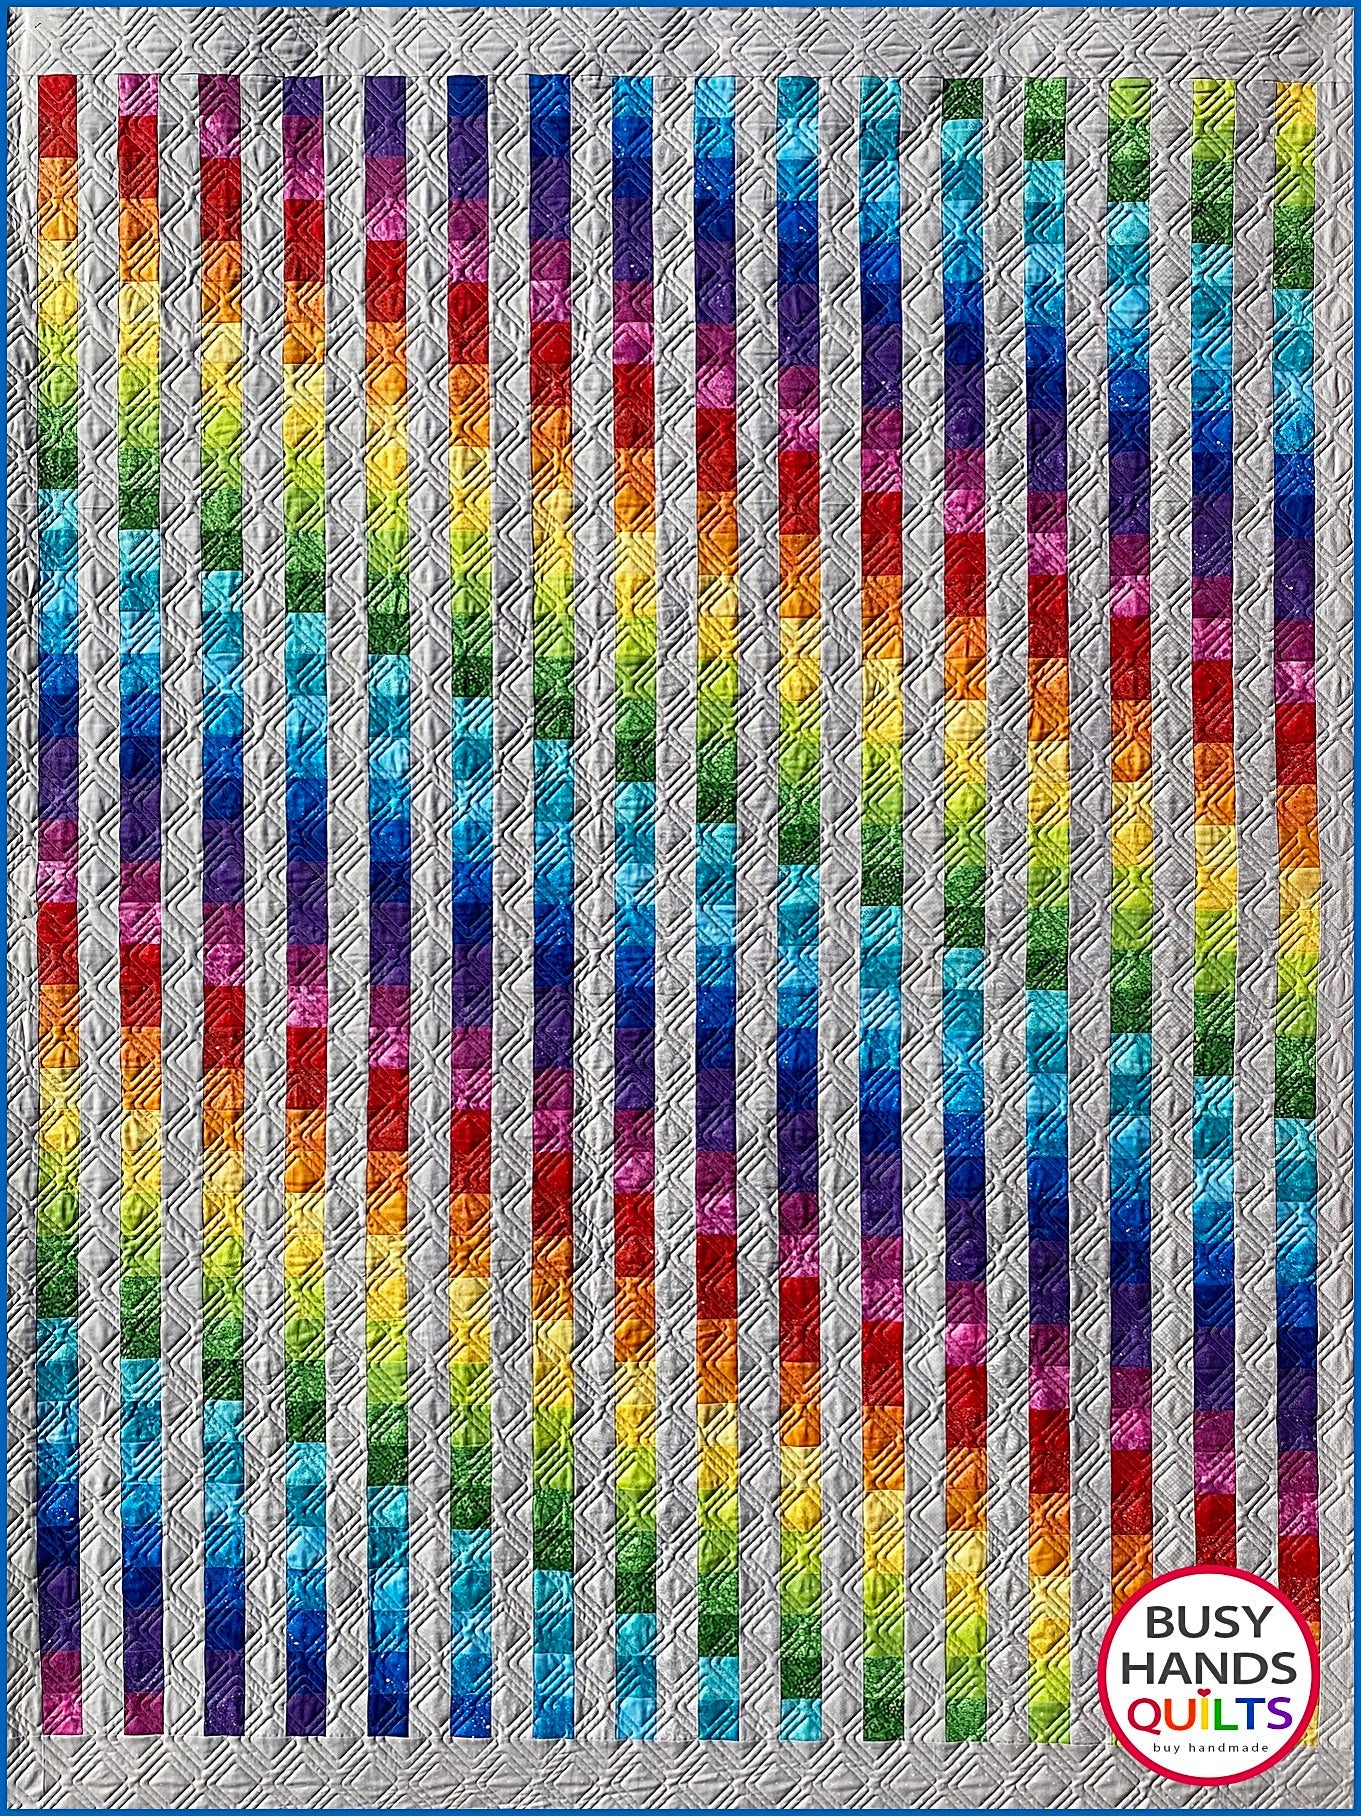 Easy Bargello Quilt Pattern PDF DOWNLOAD Busy Hands Quilts $12.99